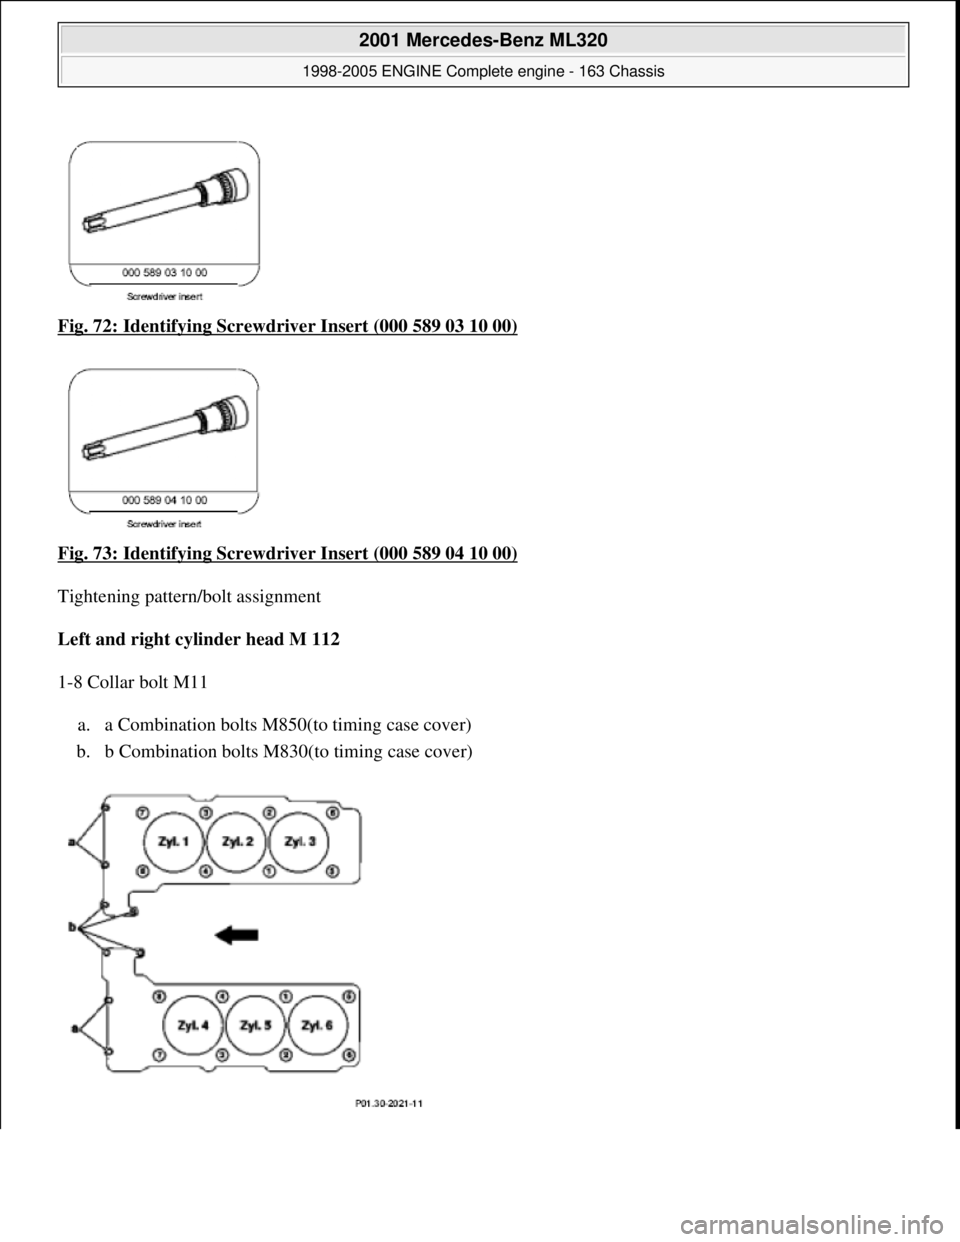 MERCEDES-BENZ ML350 1997  Complete Repair Manual Fig. 72: Identifying Screwdr iver Insert (000 589 03 10 00)  
Fig. 73: Identifying Screwdr  iver Insert (000 589 04 10 00)
  
Tightening pattern/bolt assignment 
Left and right cylinder head M 112    